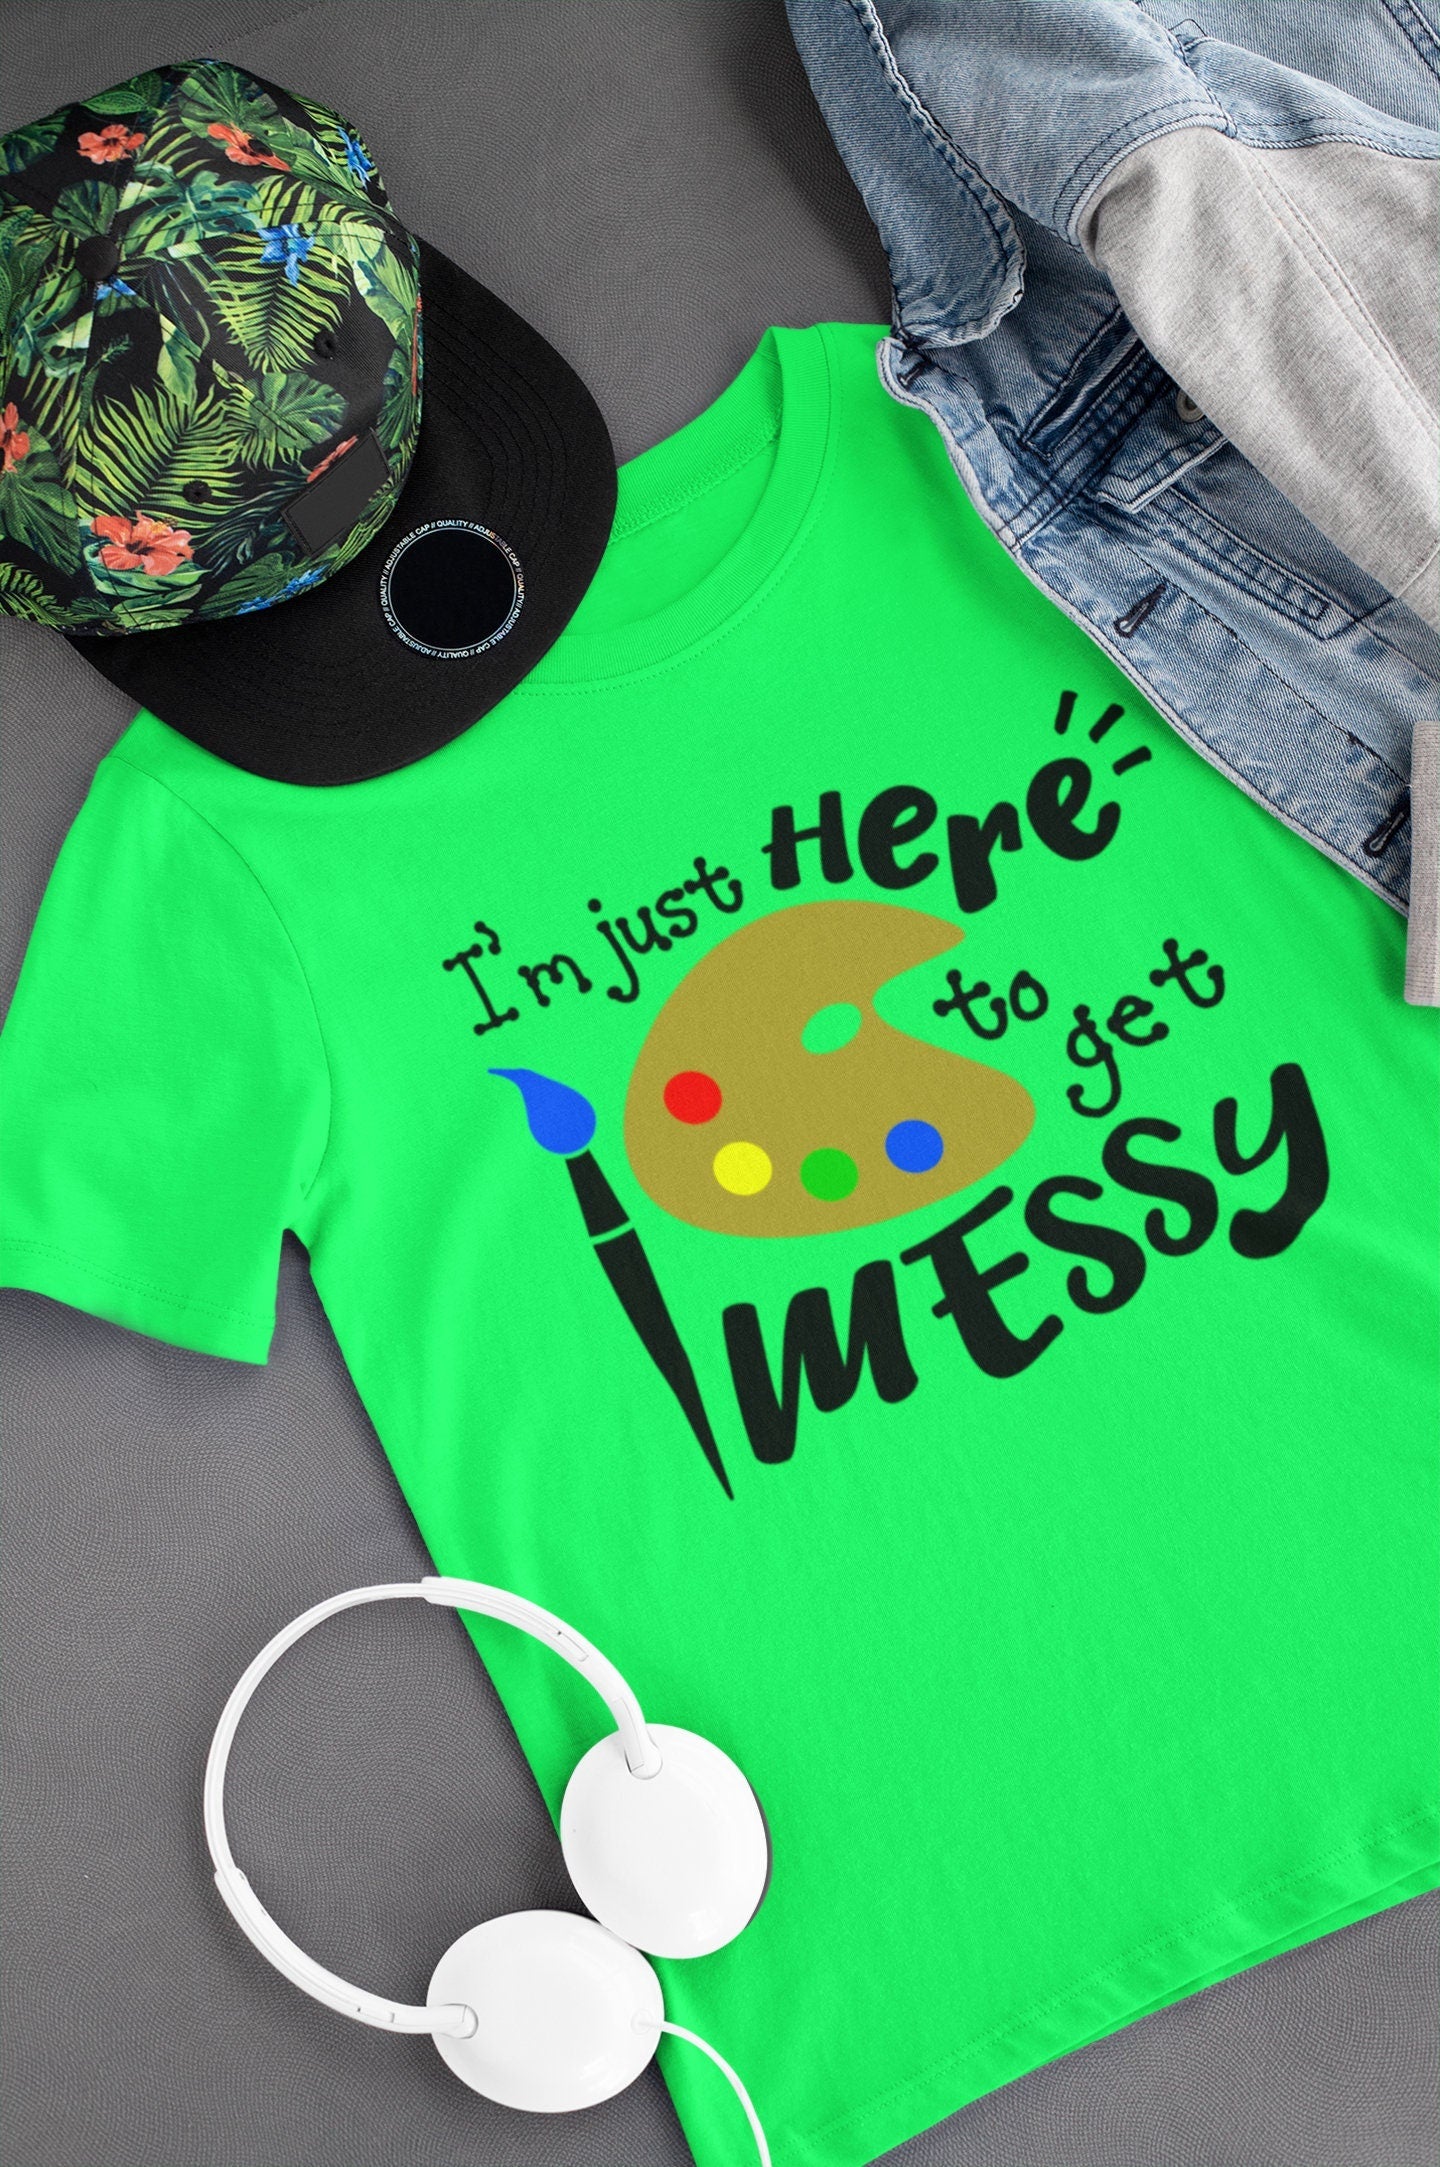 Paint Party T-Shirt, Kids Paint Party, Birthday T-Shirt, Art Party T-Shirt, Party Shirts, Matching Shirts, Artist Shirts, Paint Party B1ack By Design LLC 